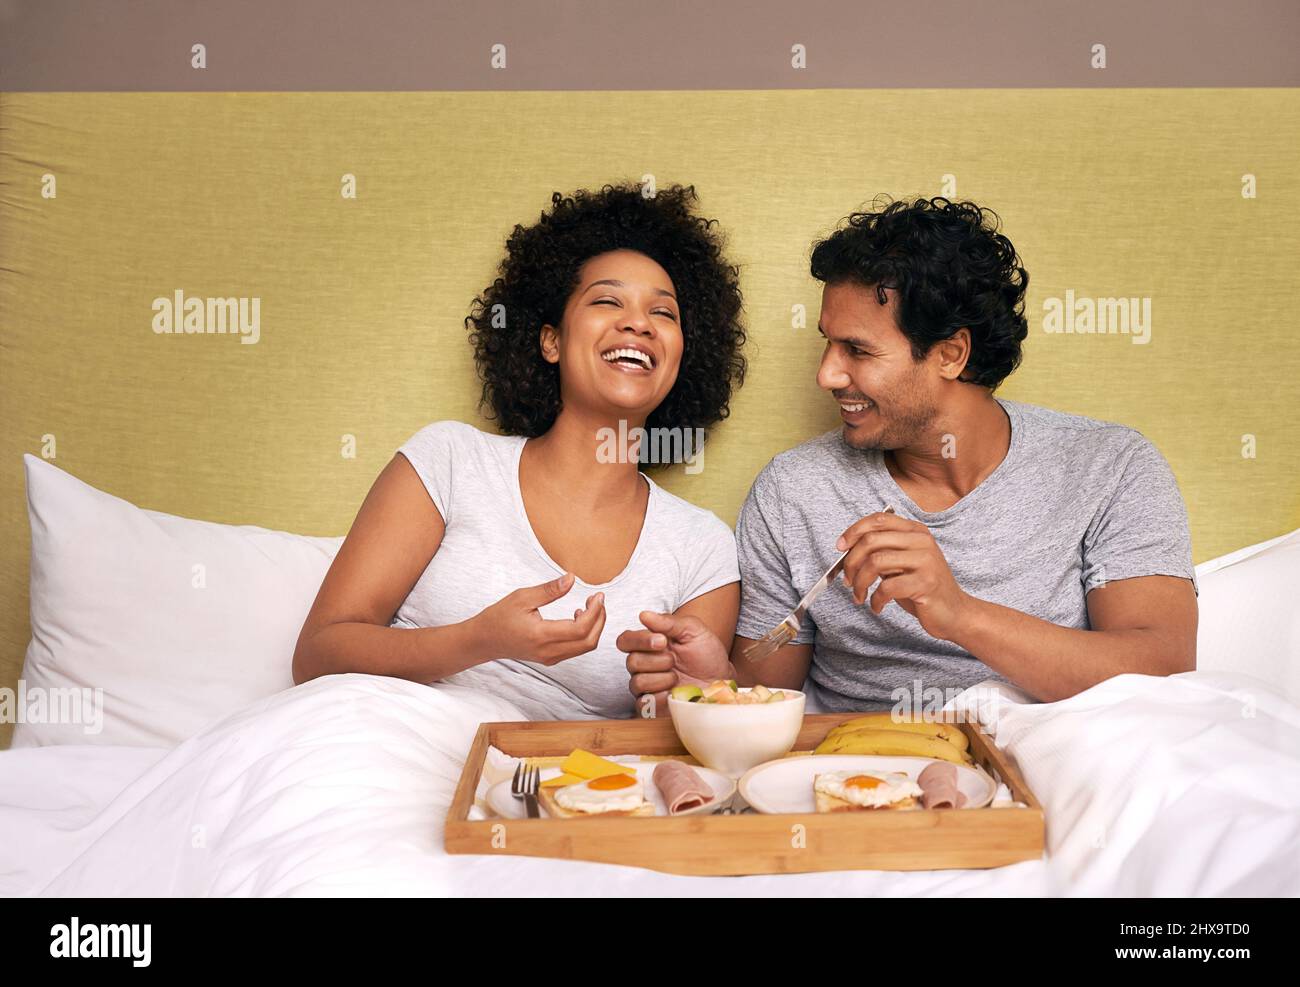 Breakfast in bed. A cute couple sharing breakfast in bed. Stock Photo